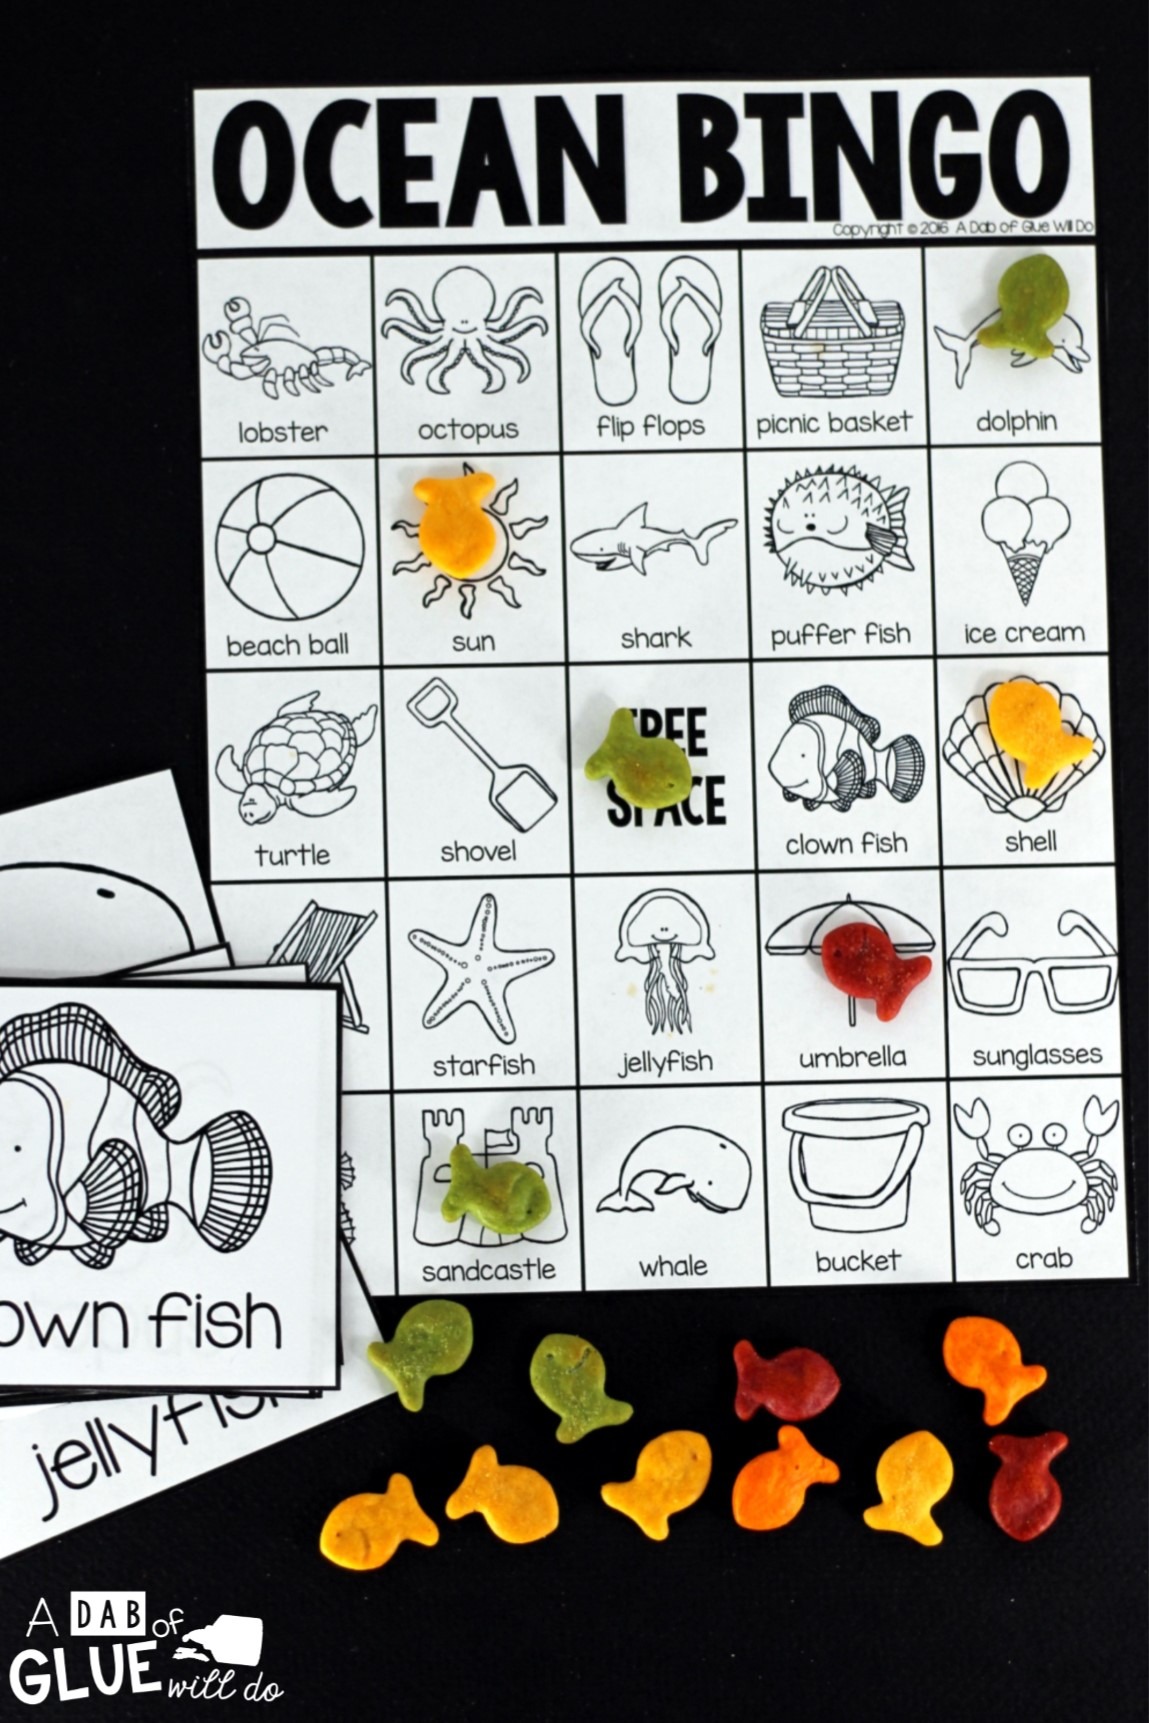 Ocean Bingo is a fun way to review learning about the ocean. This is also perfect for end of year/summer celebrations. This game can be played either whole group or in small groups. Each BINGO board is unique.